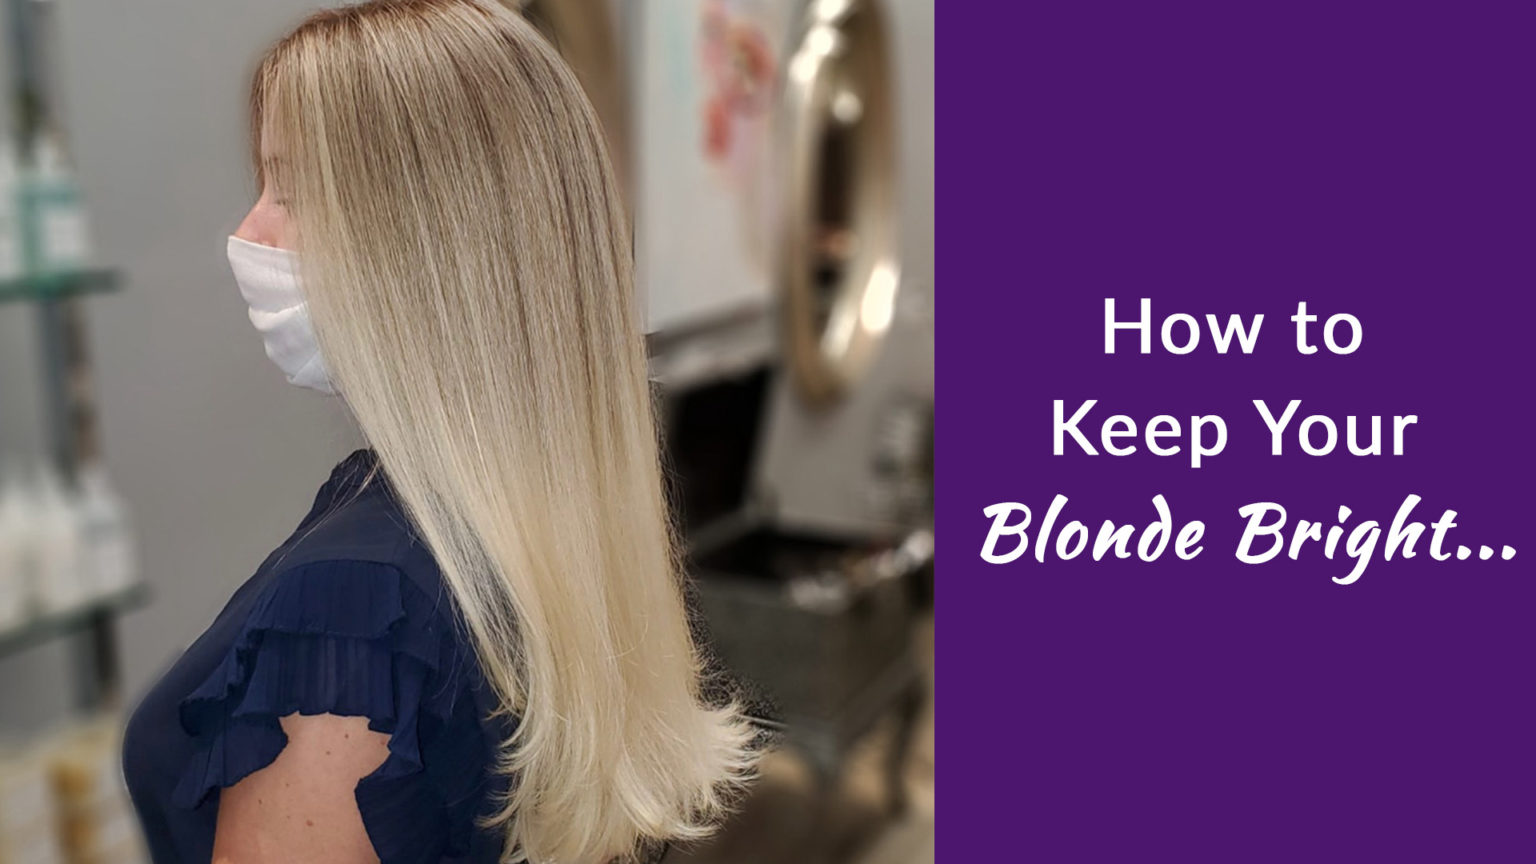 5. "Tips for Choosing the Right Shade of Bright Blonde for Your Ombré" - wide 9